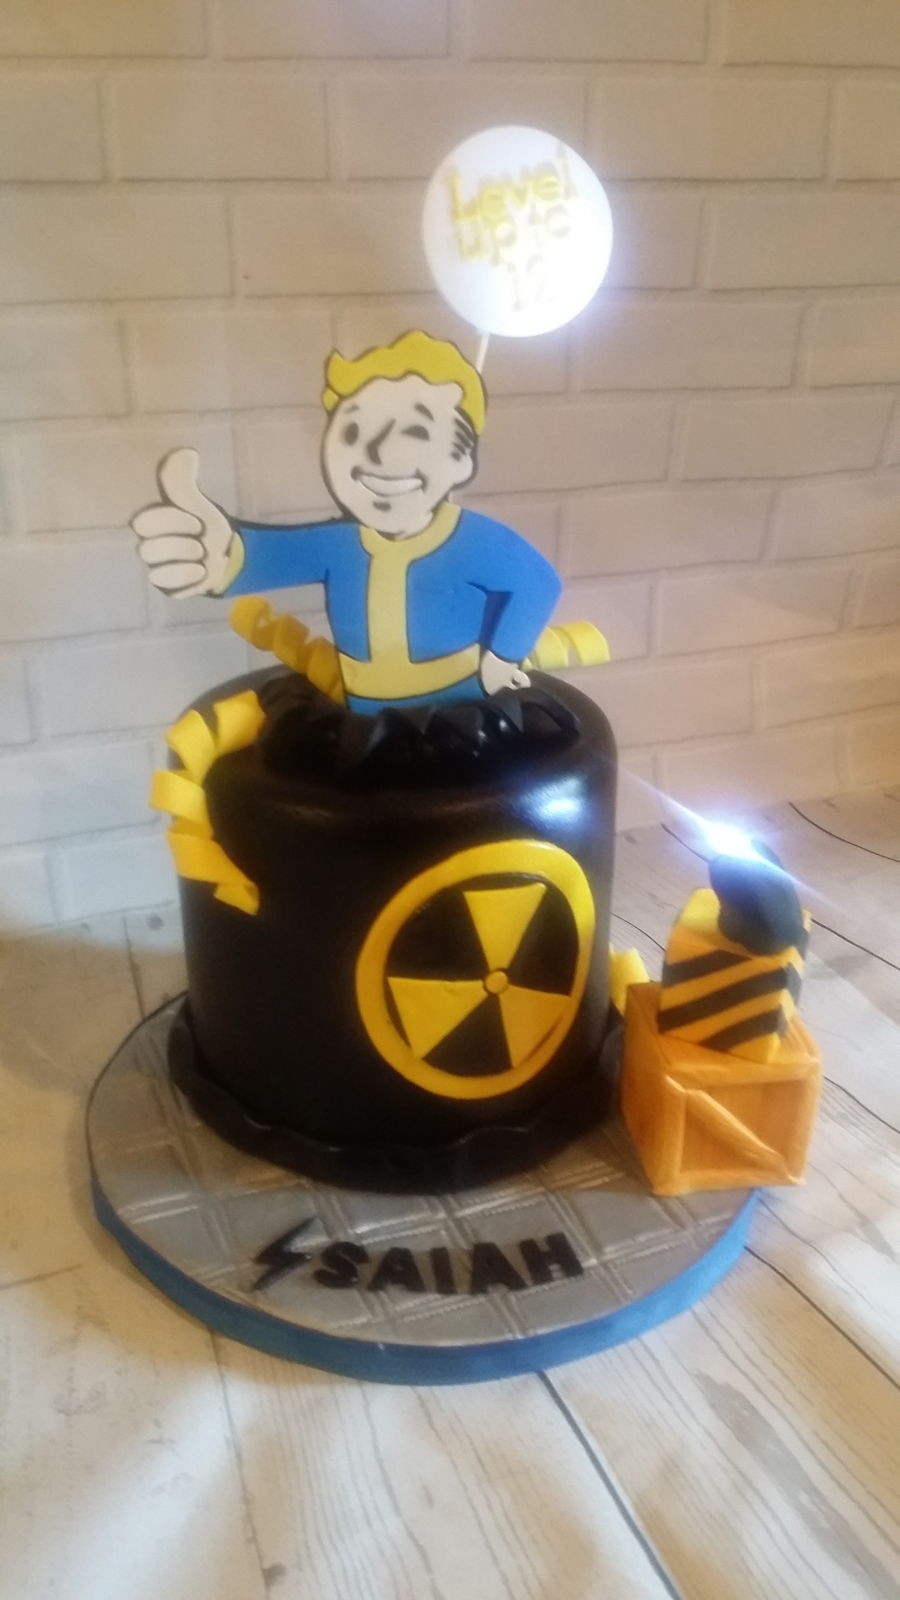 Fallout Birthday Cake
 Fallout Shelter Cake CakeCentral